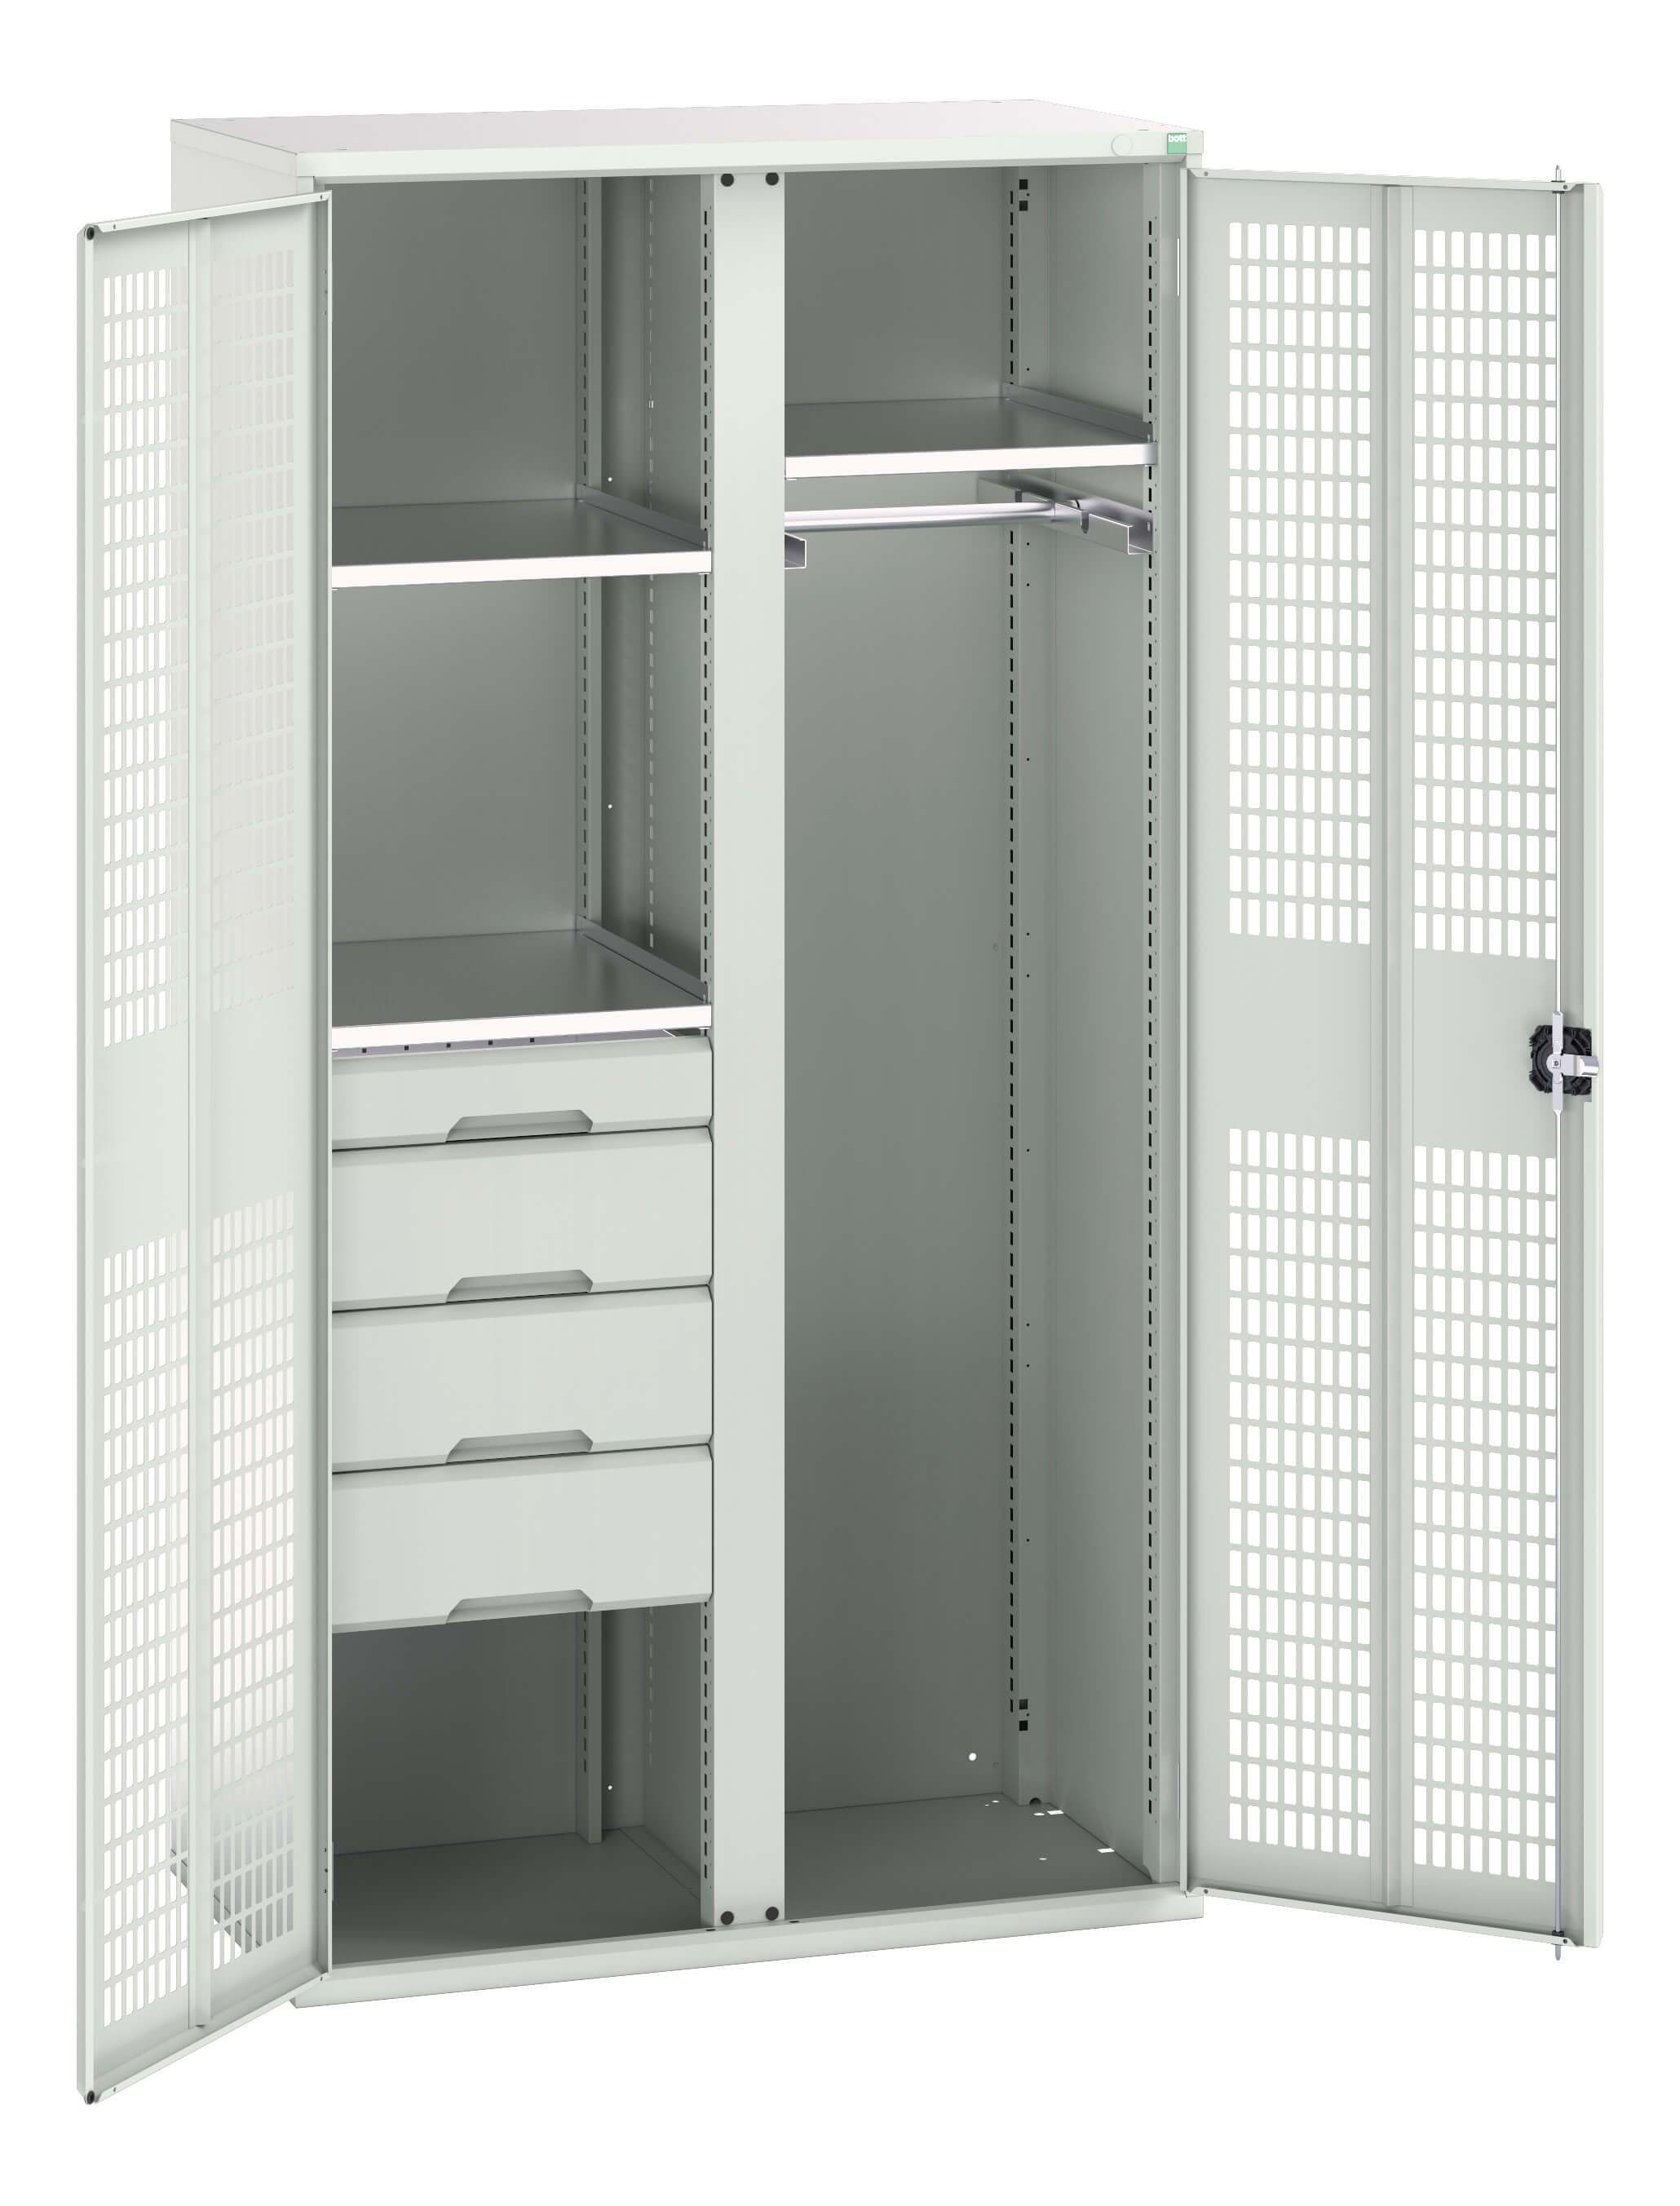 Bott Verso Ventilated Door Ppe / Janitorial Kitted Cupboard With Vertical Partition - 16926776.16